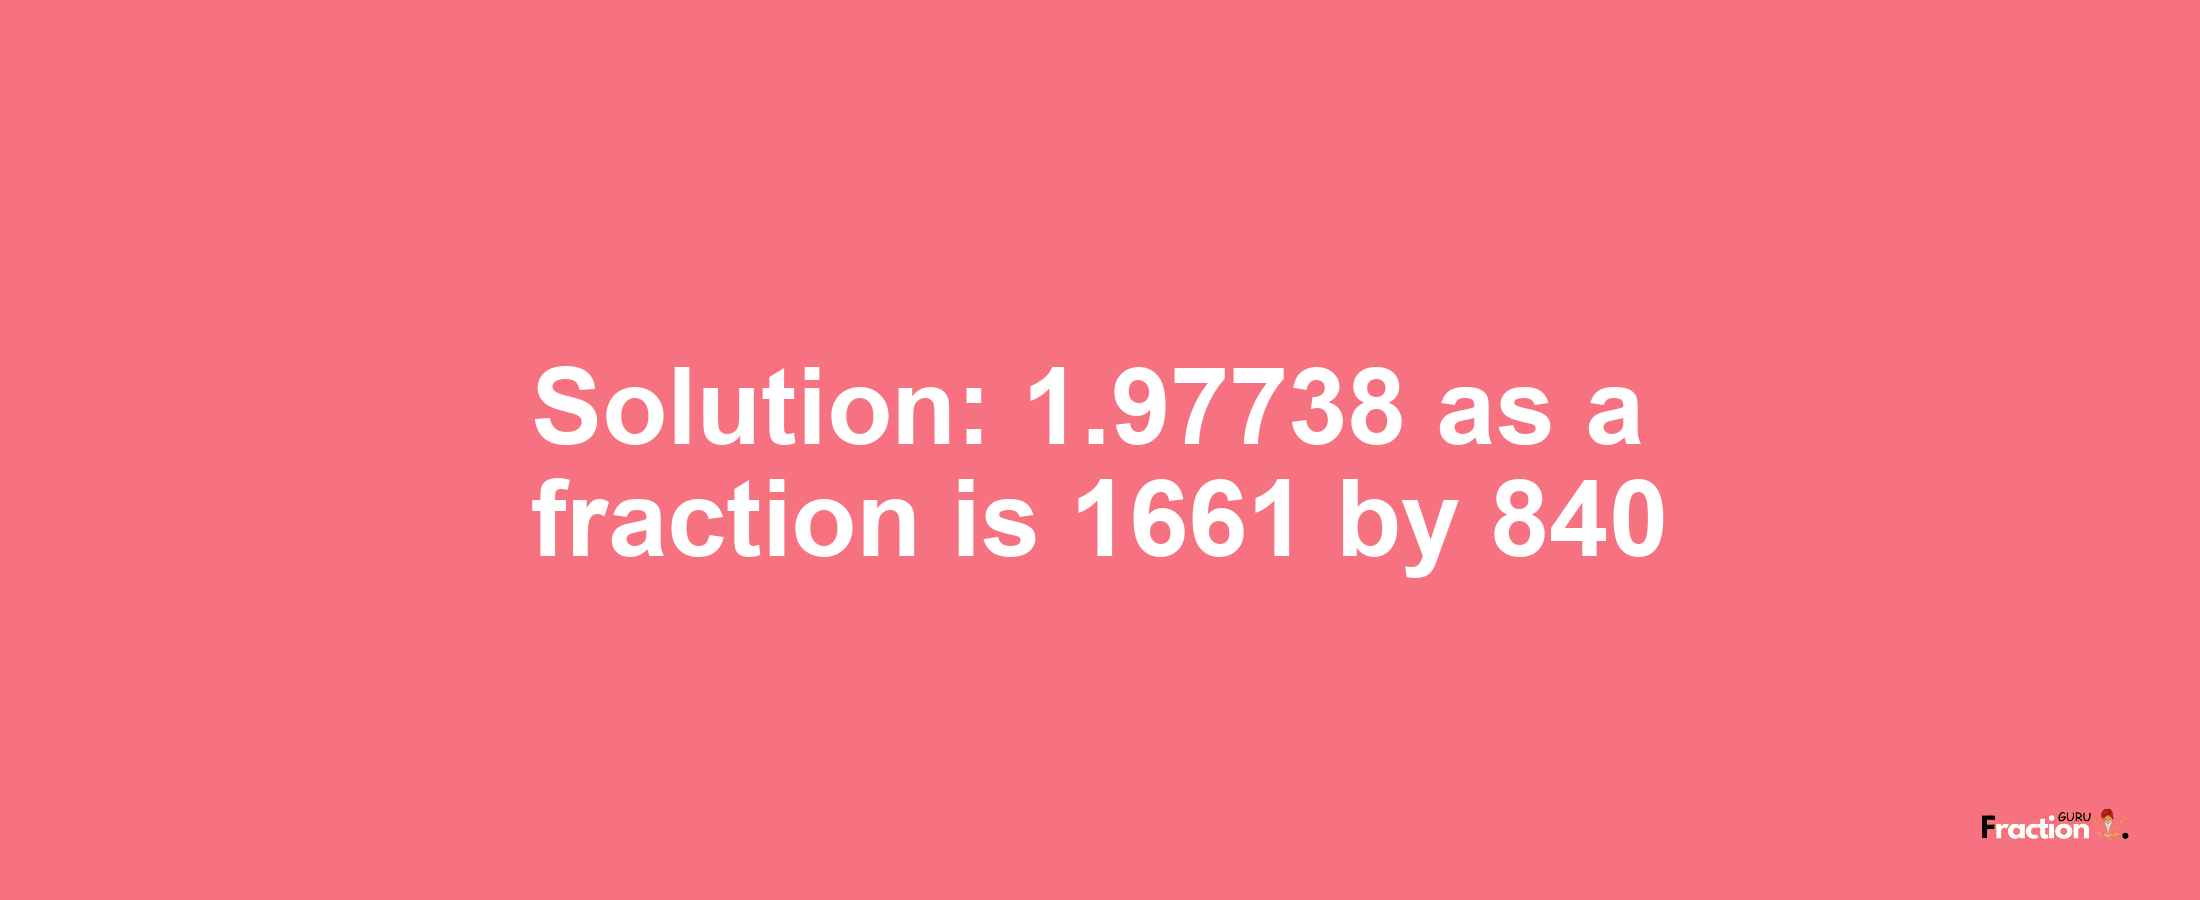 Solution:1.97738 as a fraction is 1661/840